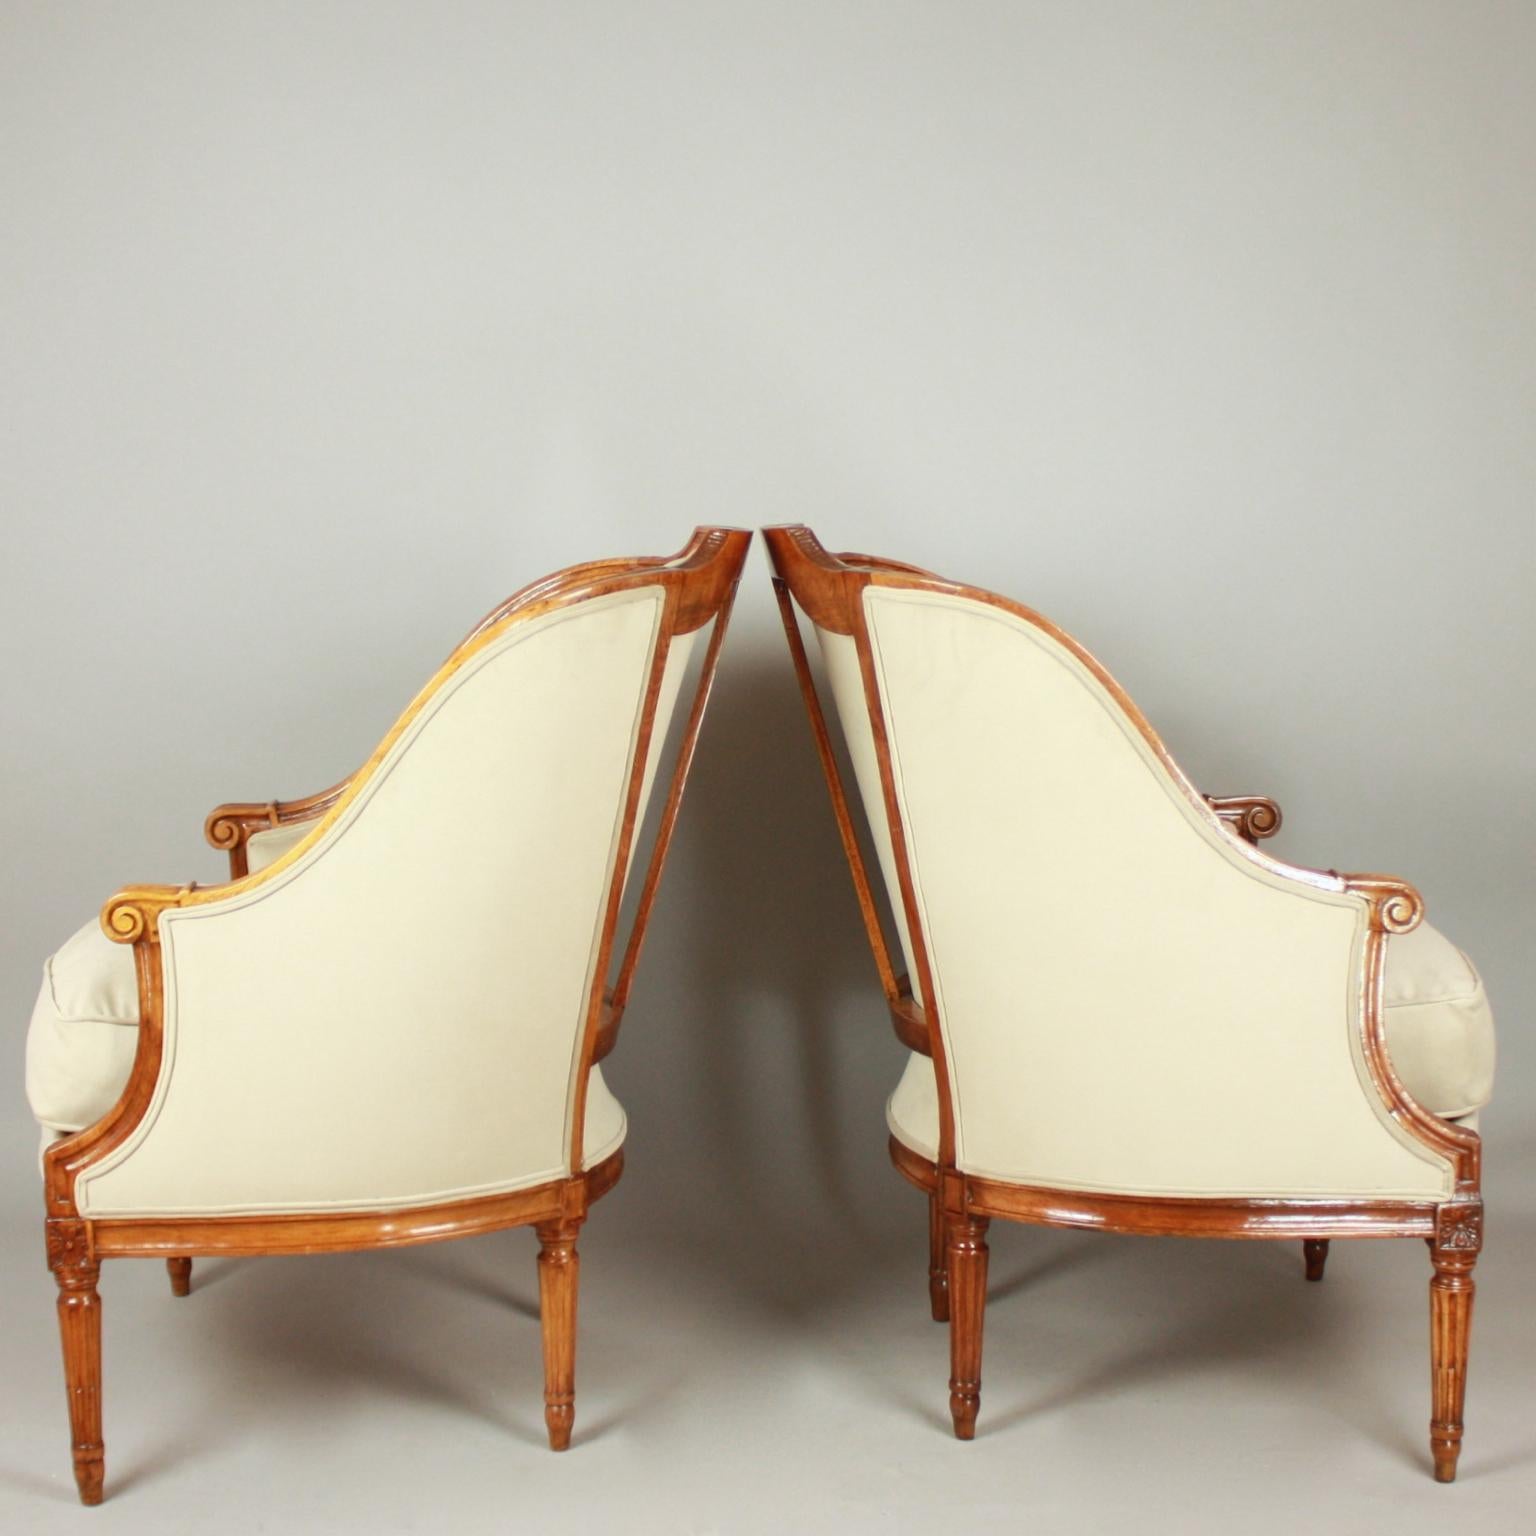 Carved Pair of Louis XVI Walnut Bergeres or Armchairs, French, circa 1780